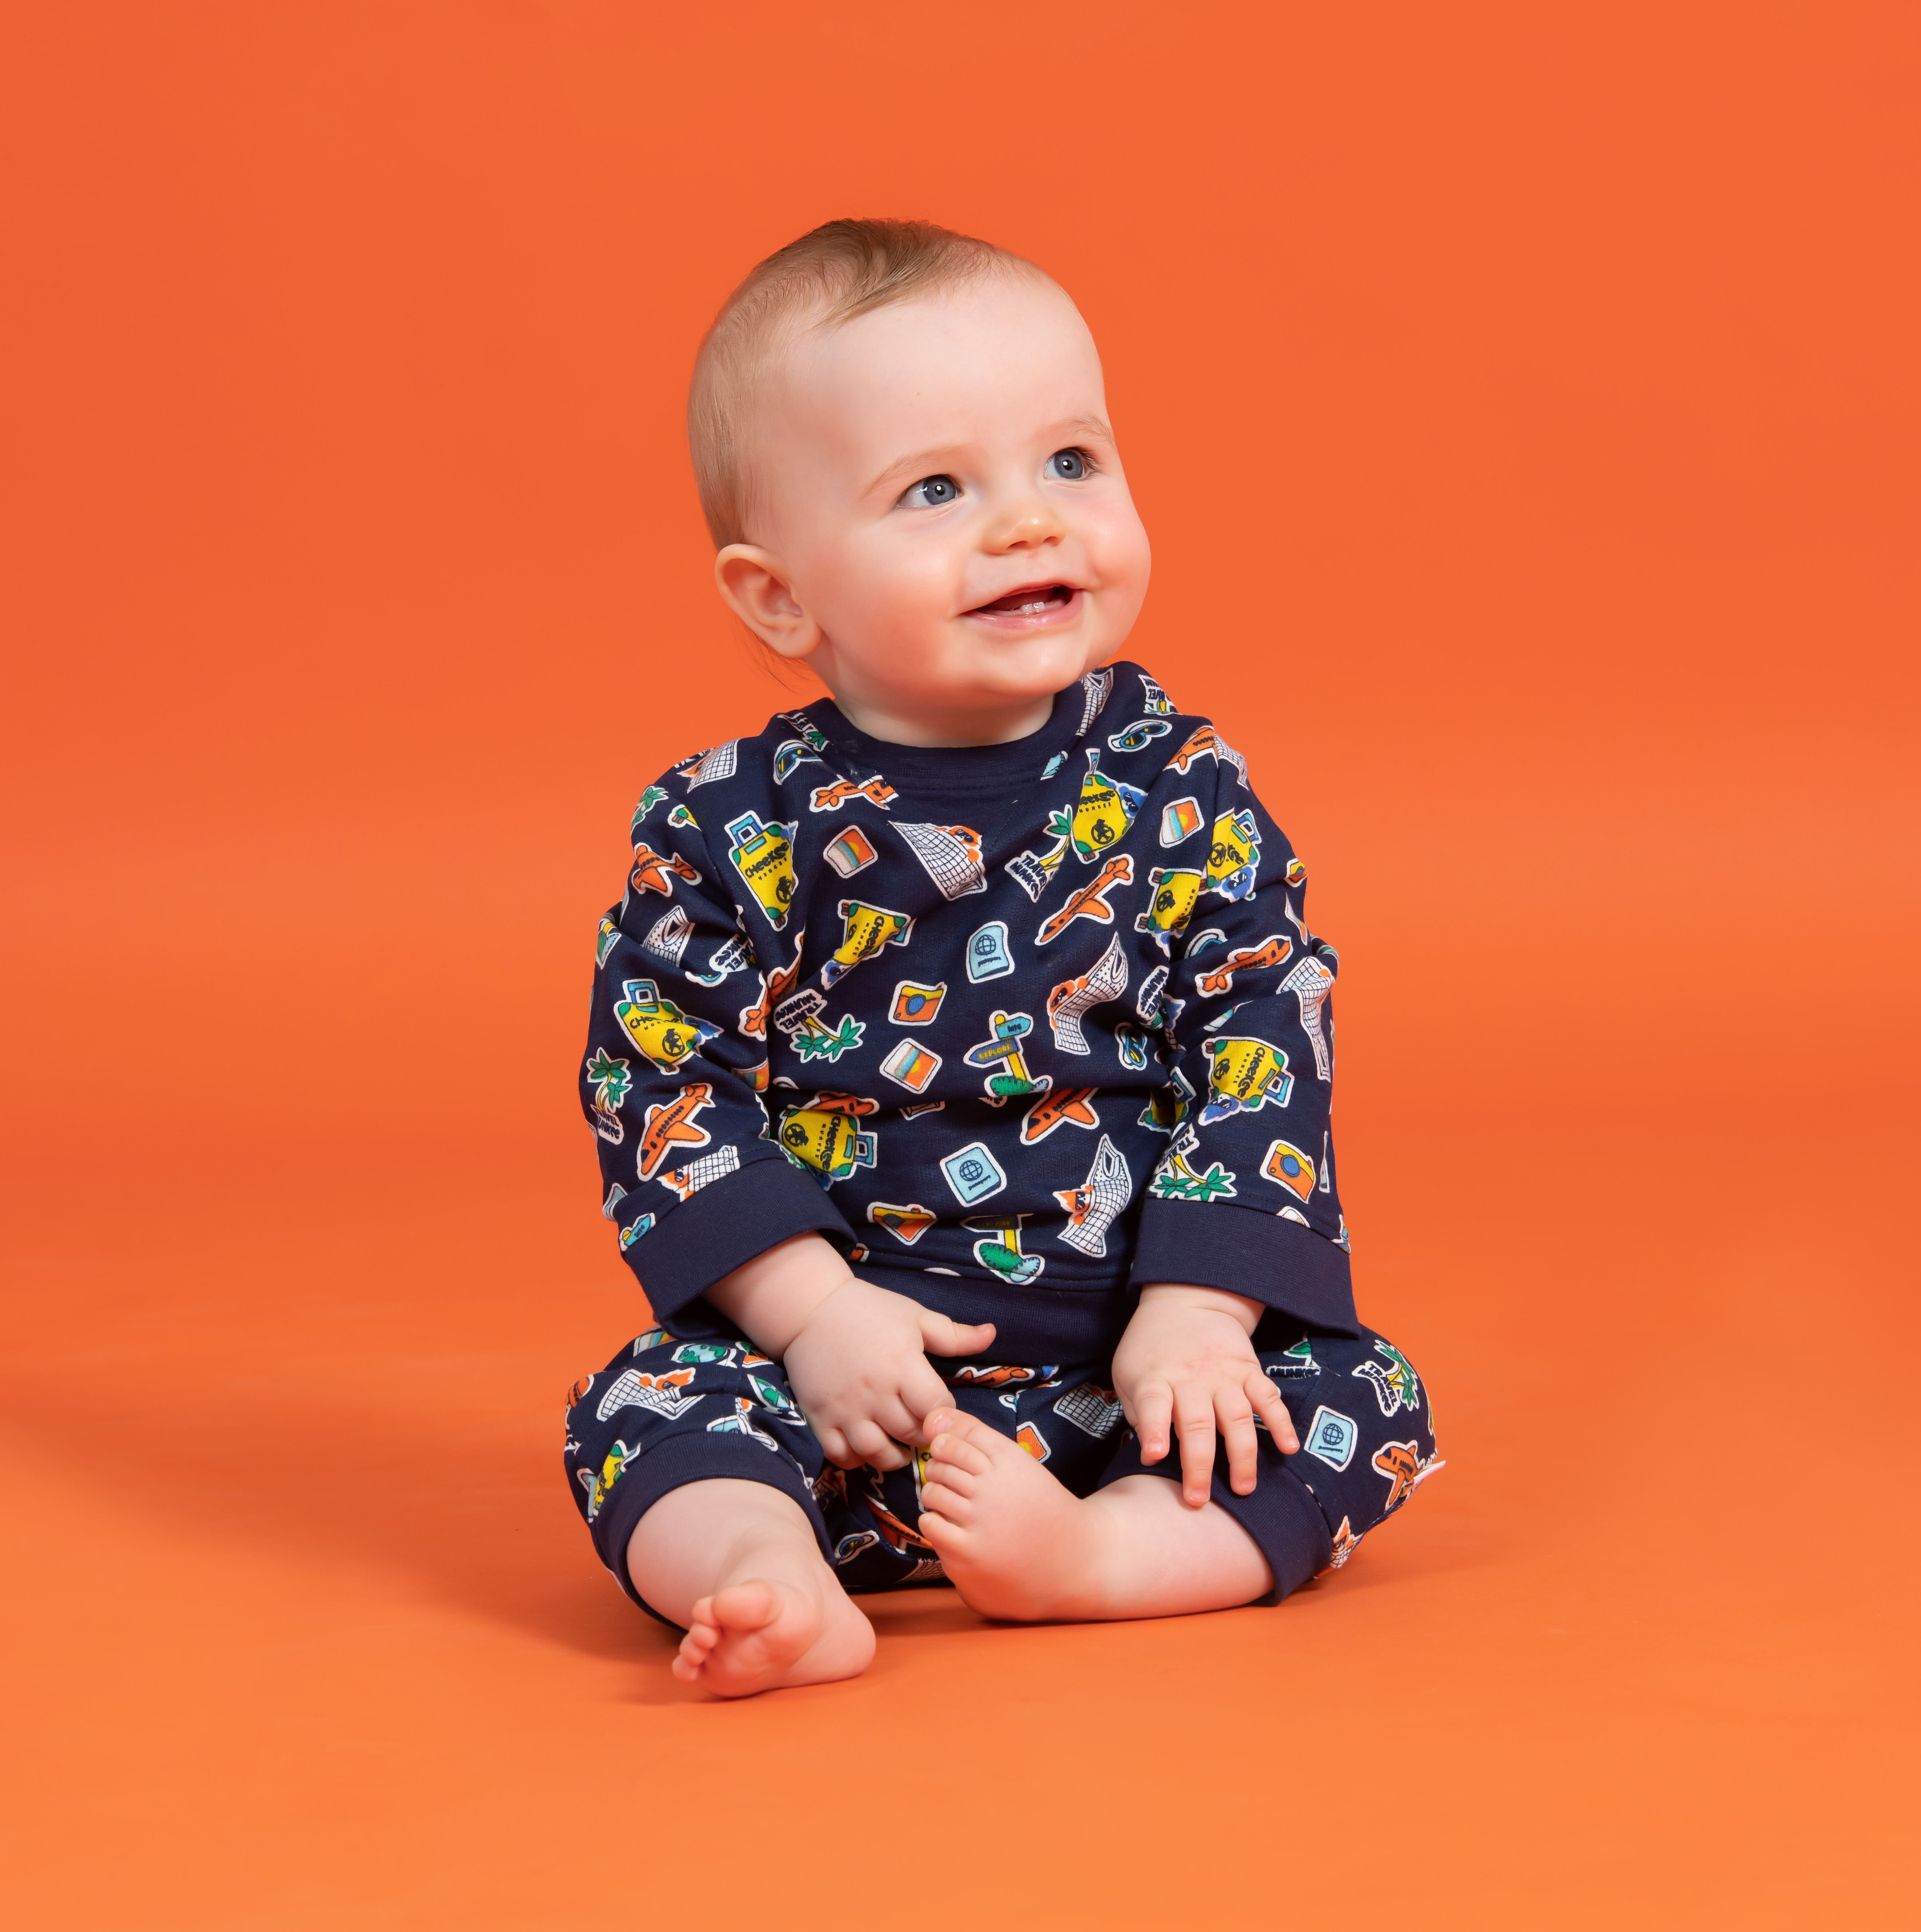 Embrace Fall Fashion with Cheekee Munkee’s Cozy Loungewear Staples for Your Little ones